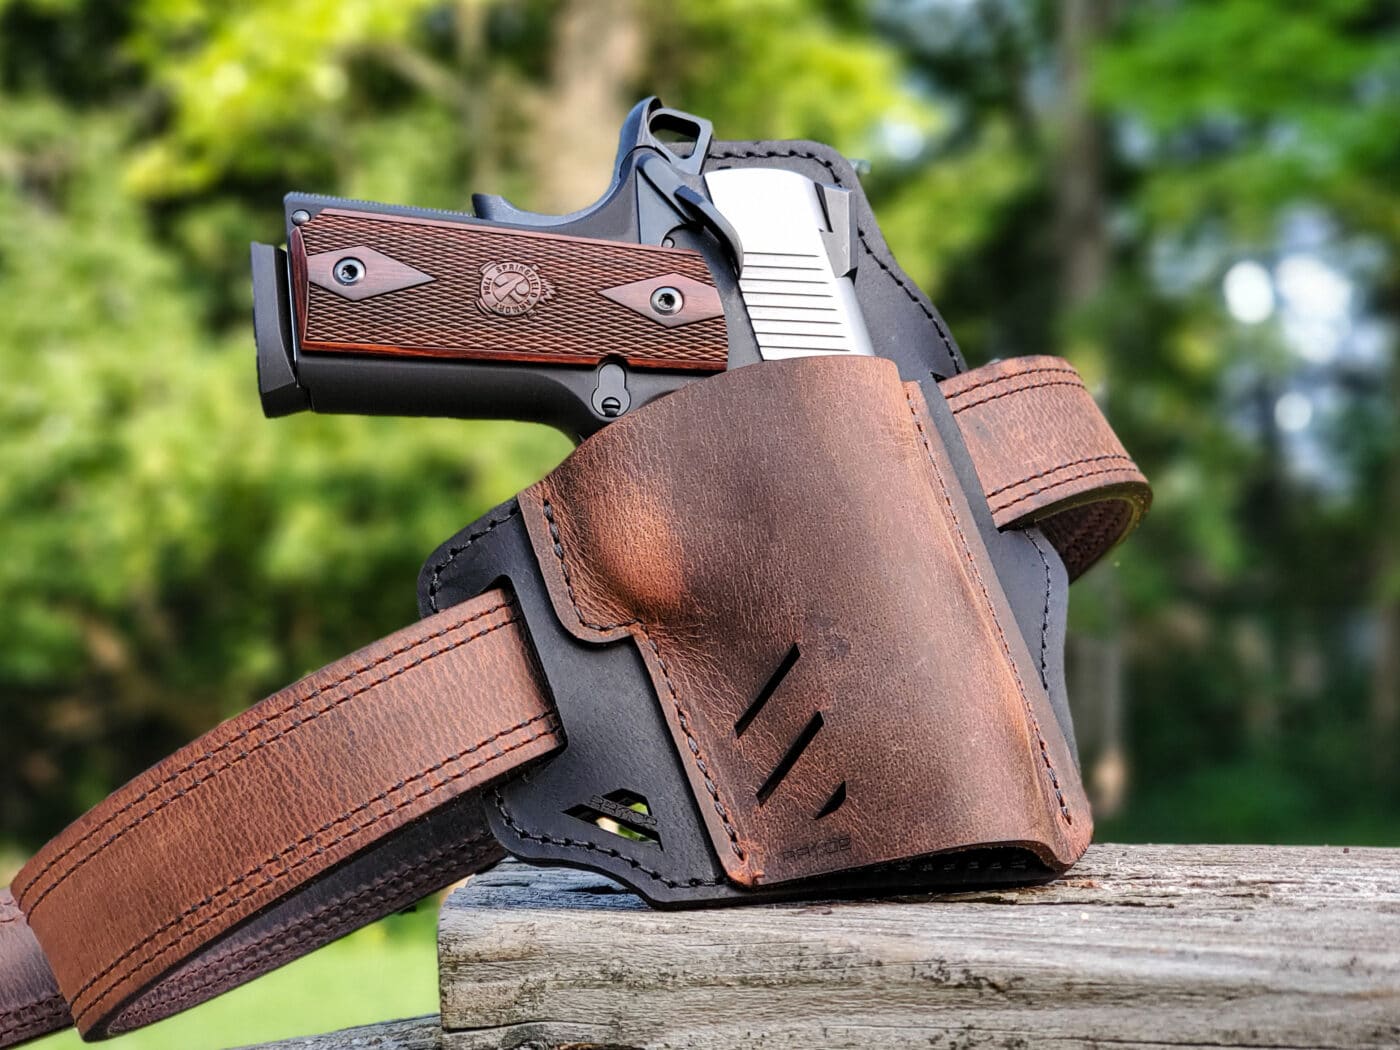 Rough Rider holster with 1911 pistol in it